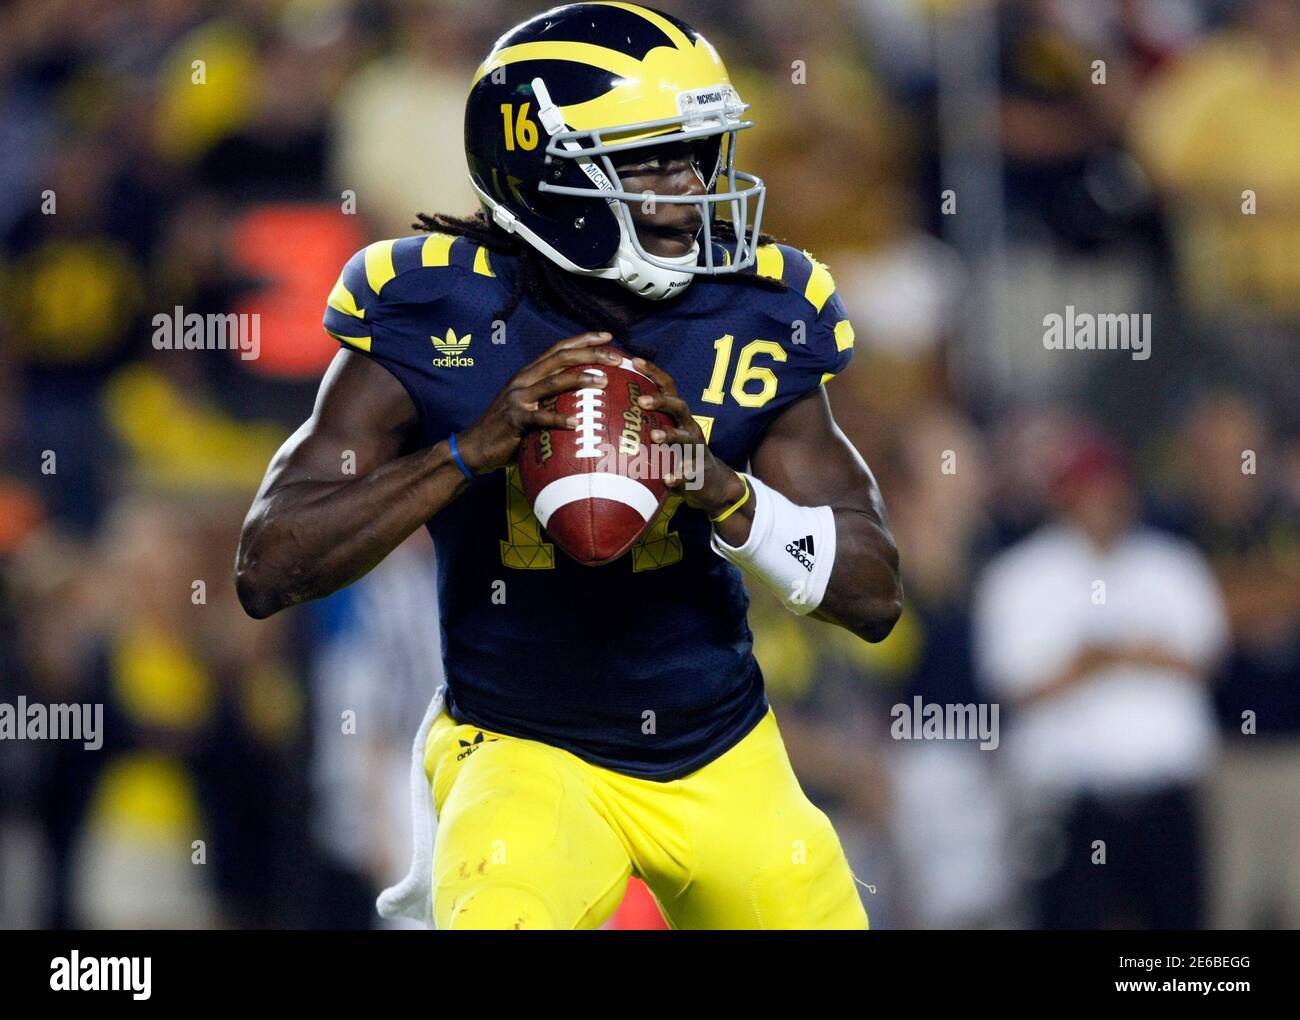 Michigan quarterback Denard Robinson looks for his receiver during the  first half of their NCAA college football game against Notre Dame in Ann  Arbor, Michigan September 10, 2011. Both teams wore throw